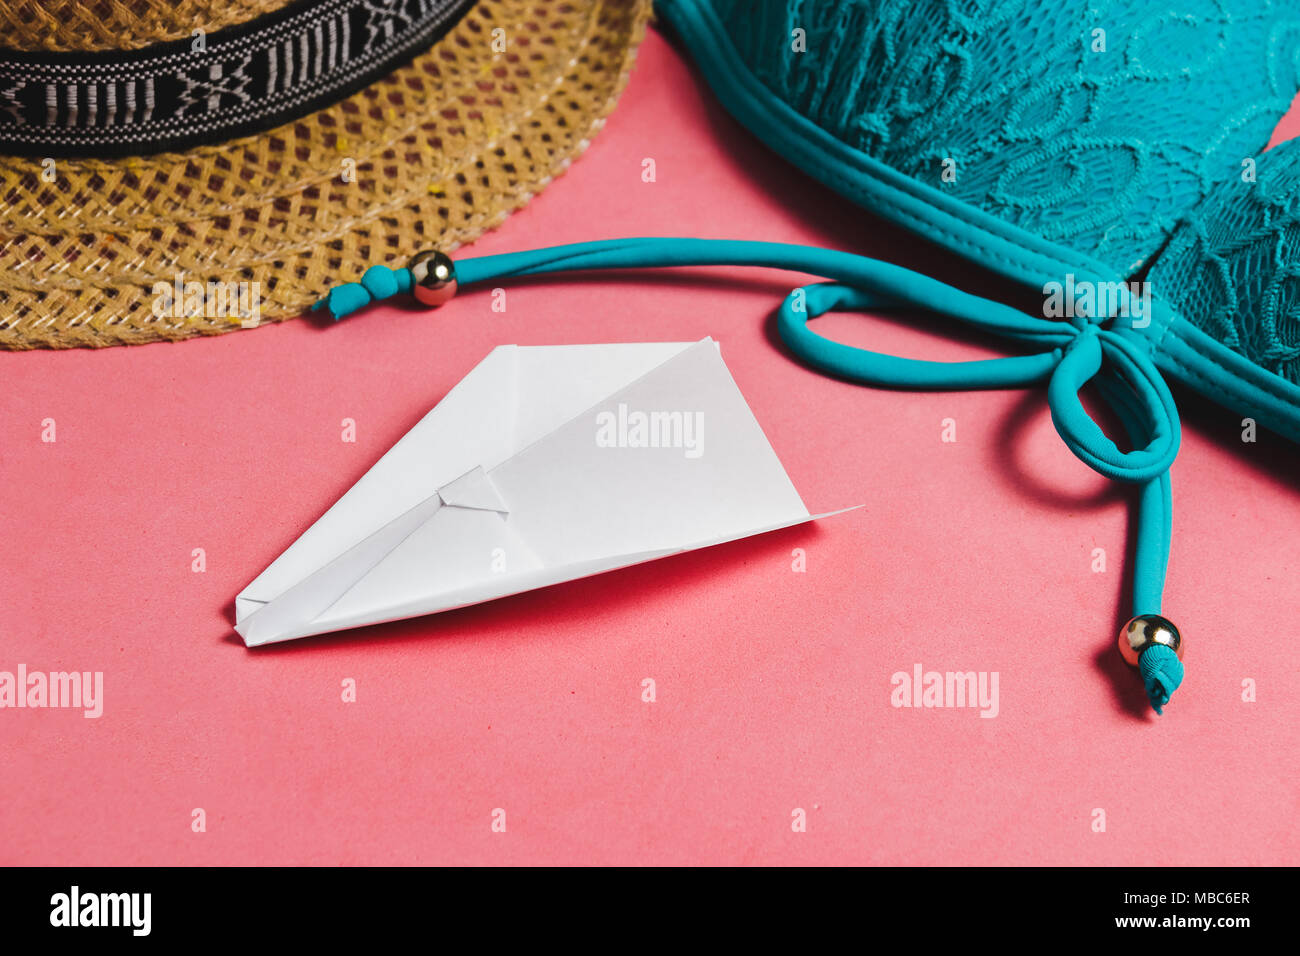 Swimsuit, Hat, Papercraft Plane on Pink Background. Travel Concept with Copyspace. Stock Photo